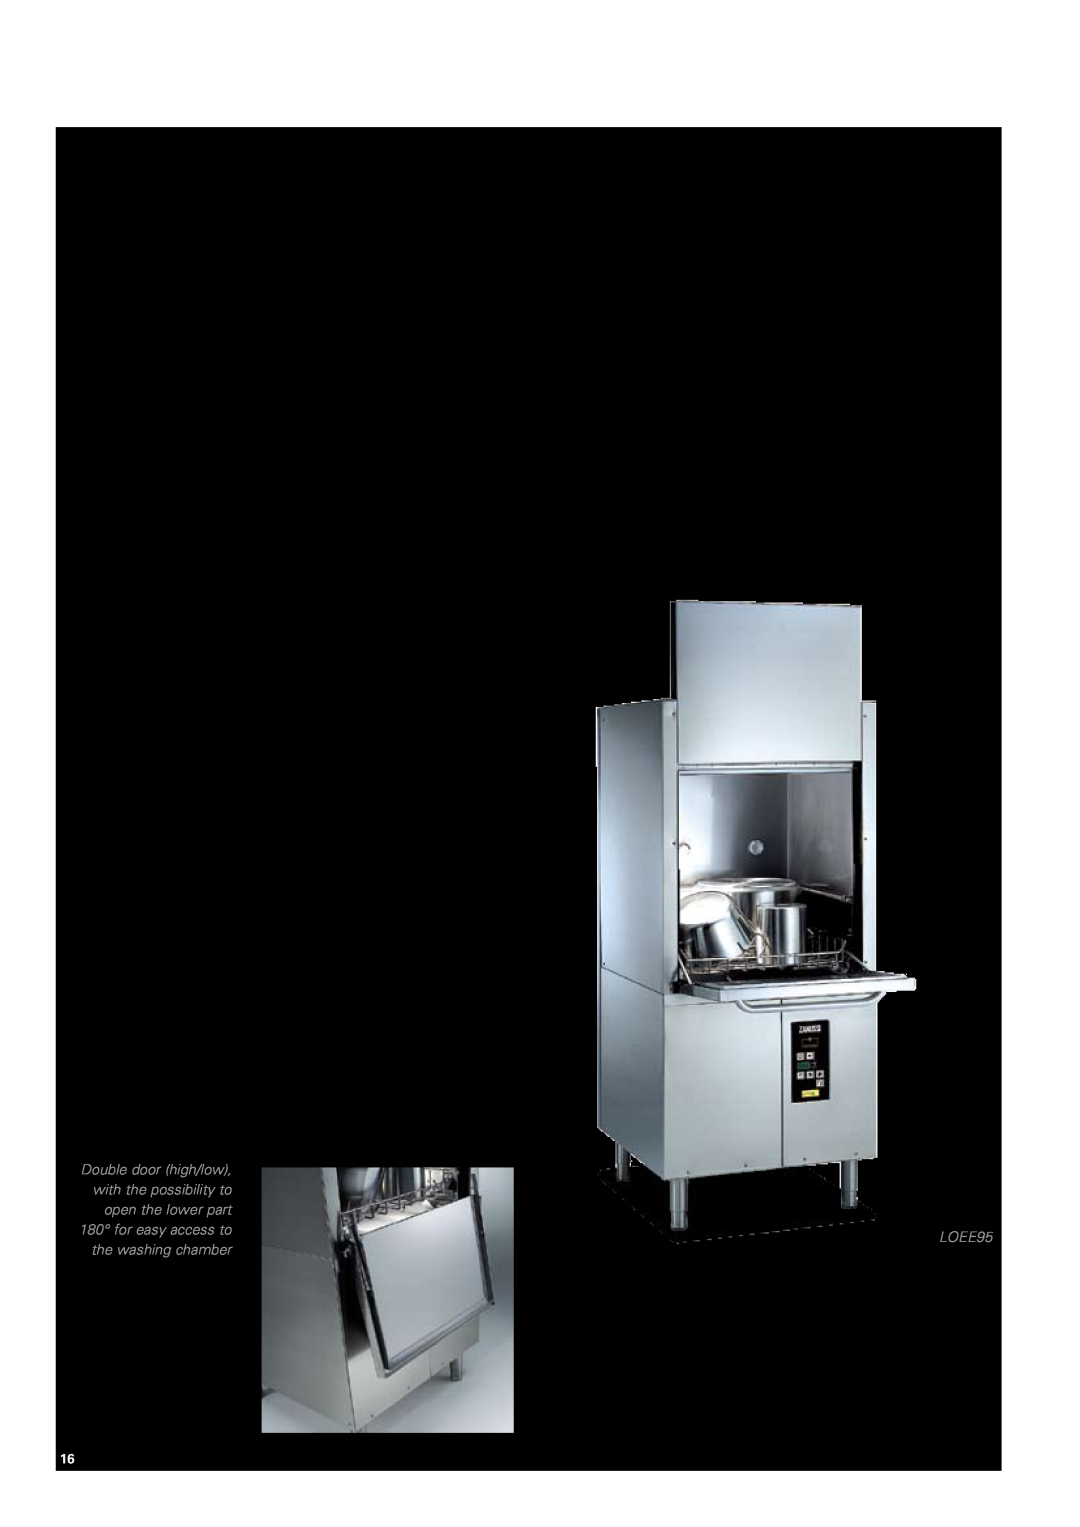 Zanussi RTM 165, Snack 600, N 700, RTM 140, WT90 The Range Of Pot & Pan Washers Includes, 1 x 900 mm wide electric model 